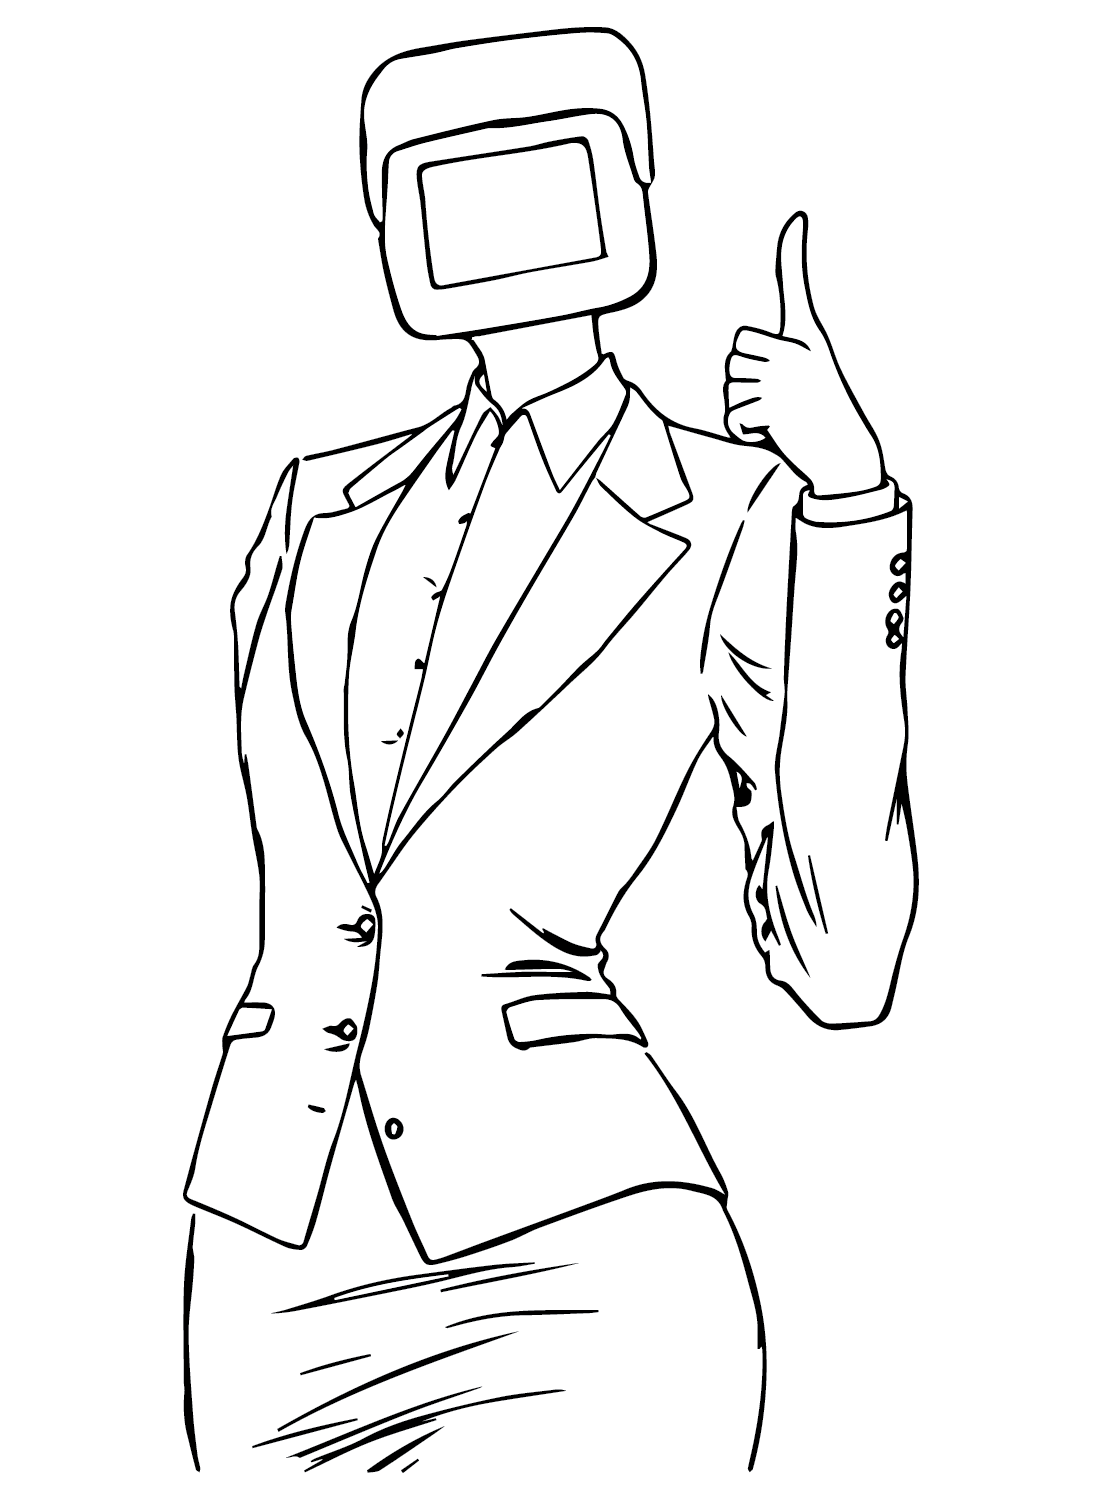 Camerawoman Coloring Page